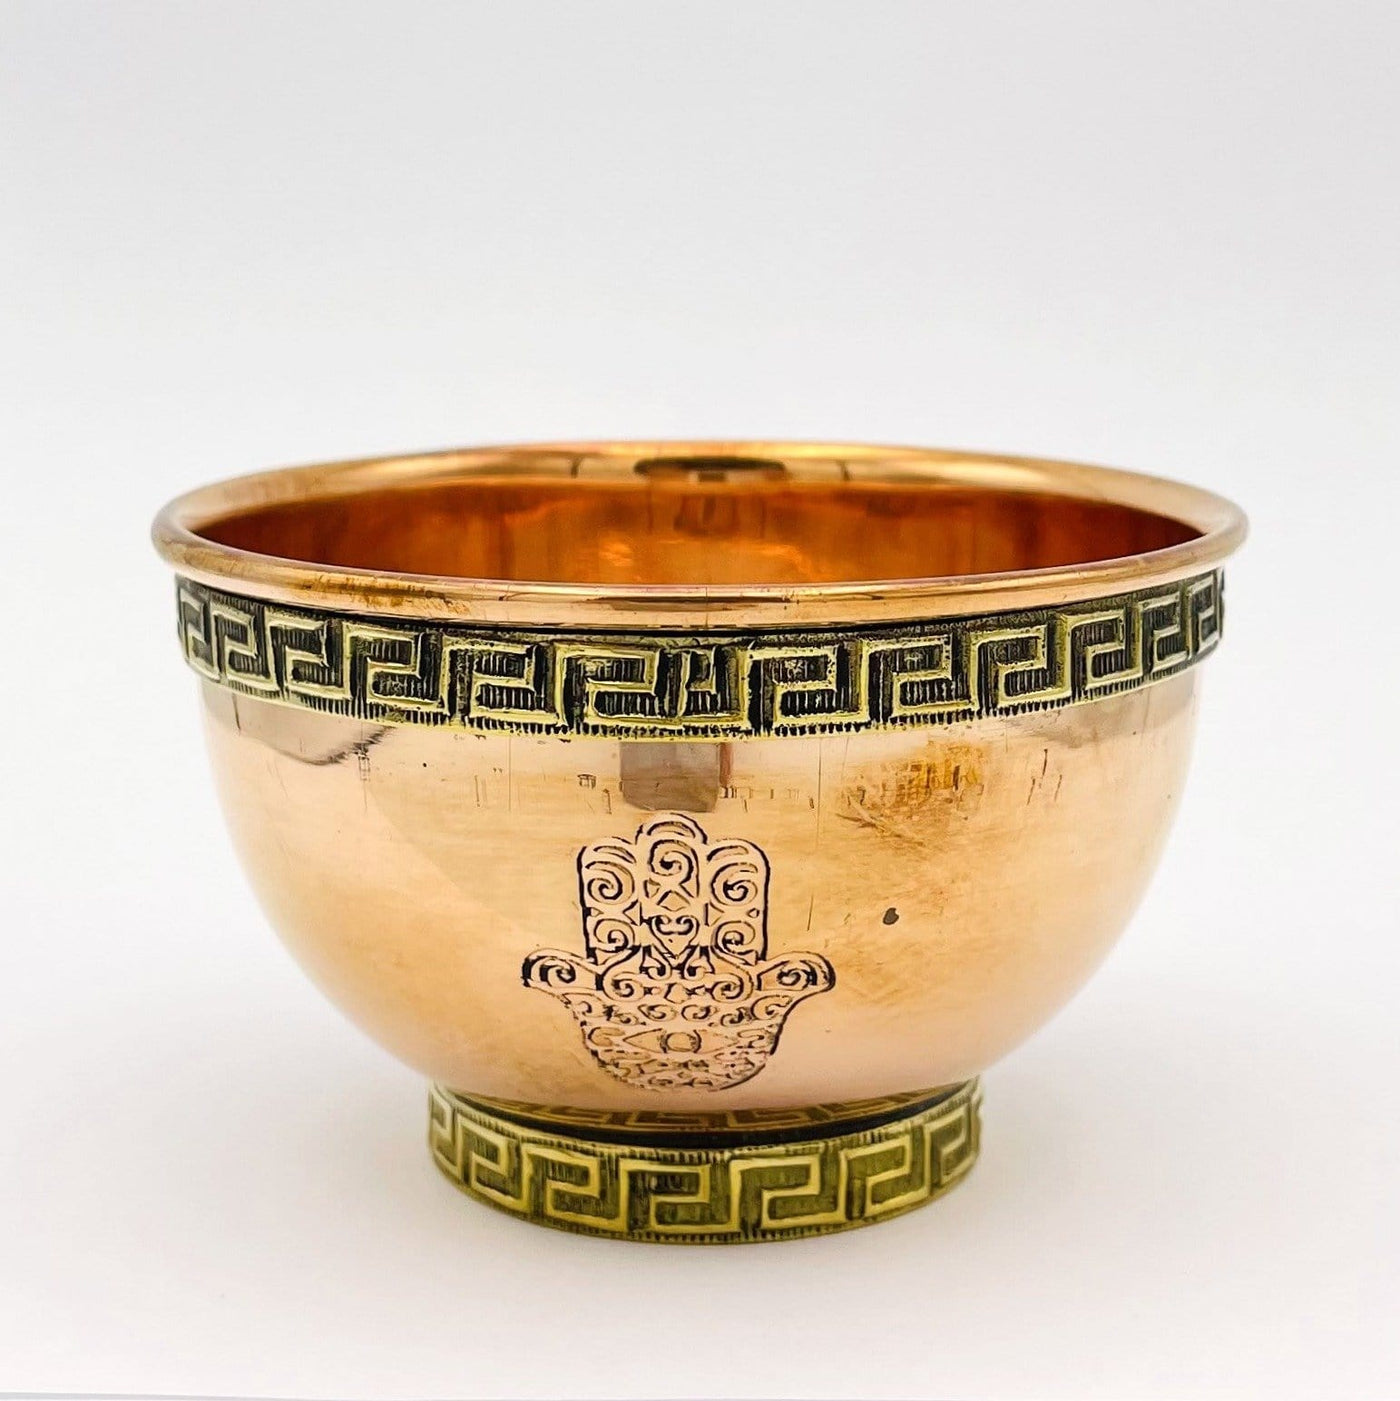 offering bowls have engraved designs on the top and the bottom portions 